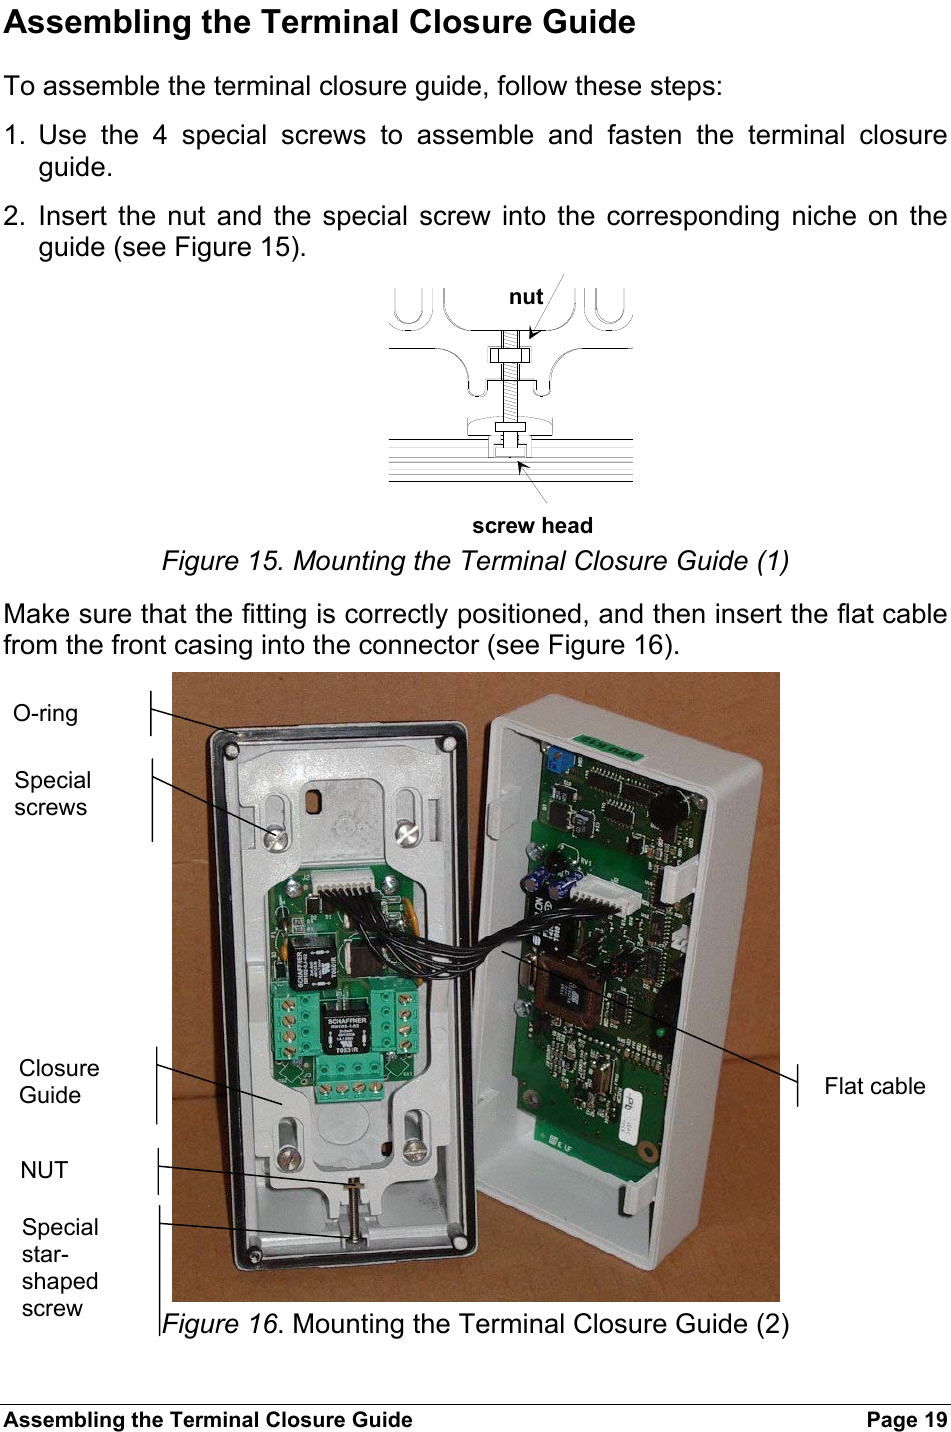 Assembling the Terminal Closure Guide  Page 19 Assembling the Terminal Closure Guide To assemble the terminal closure guide, follow these steps: 1. Use the 4 special screws to assemble and fasten the terminal closure guide. 2. Insert the nut and the special screw into the corresponding niche on the guide (see Figure 15). nutscrew head  Figure 15. Mounting the Terminal Closure Guide (1) Make sure that the fitting is correctly positioned, and then insert the flat cable from the front casing into the connector (see Figure 16).  Figure 16. Mounting the Terminal Closure Guide (2) O-ring Special screws Closure Guide NUT Special star-shaped screw Flat cable